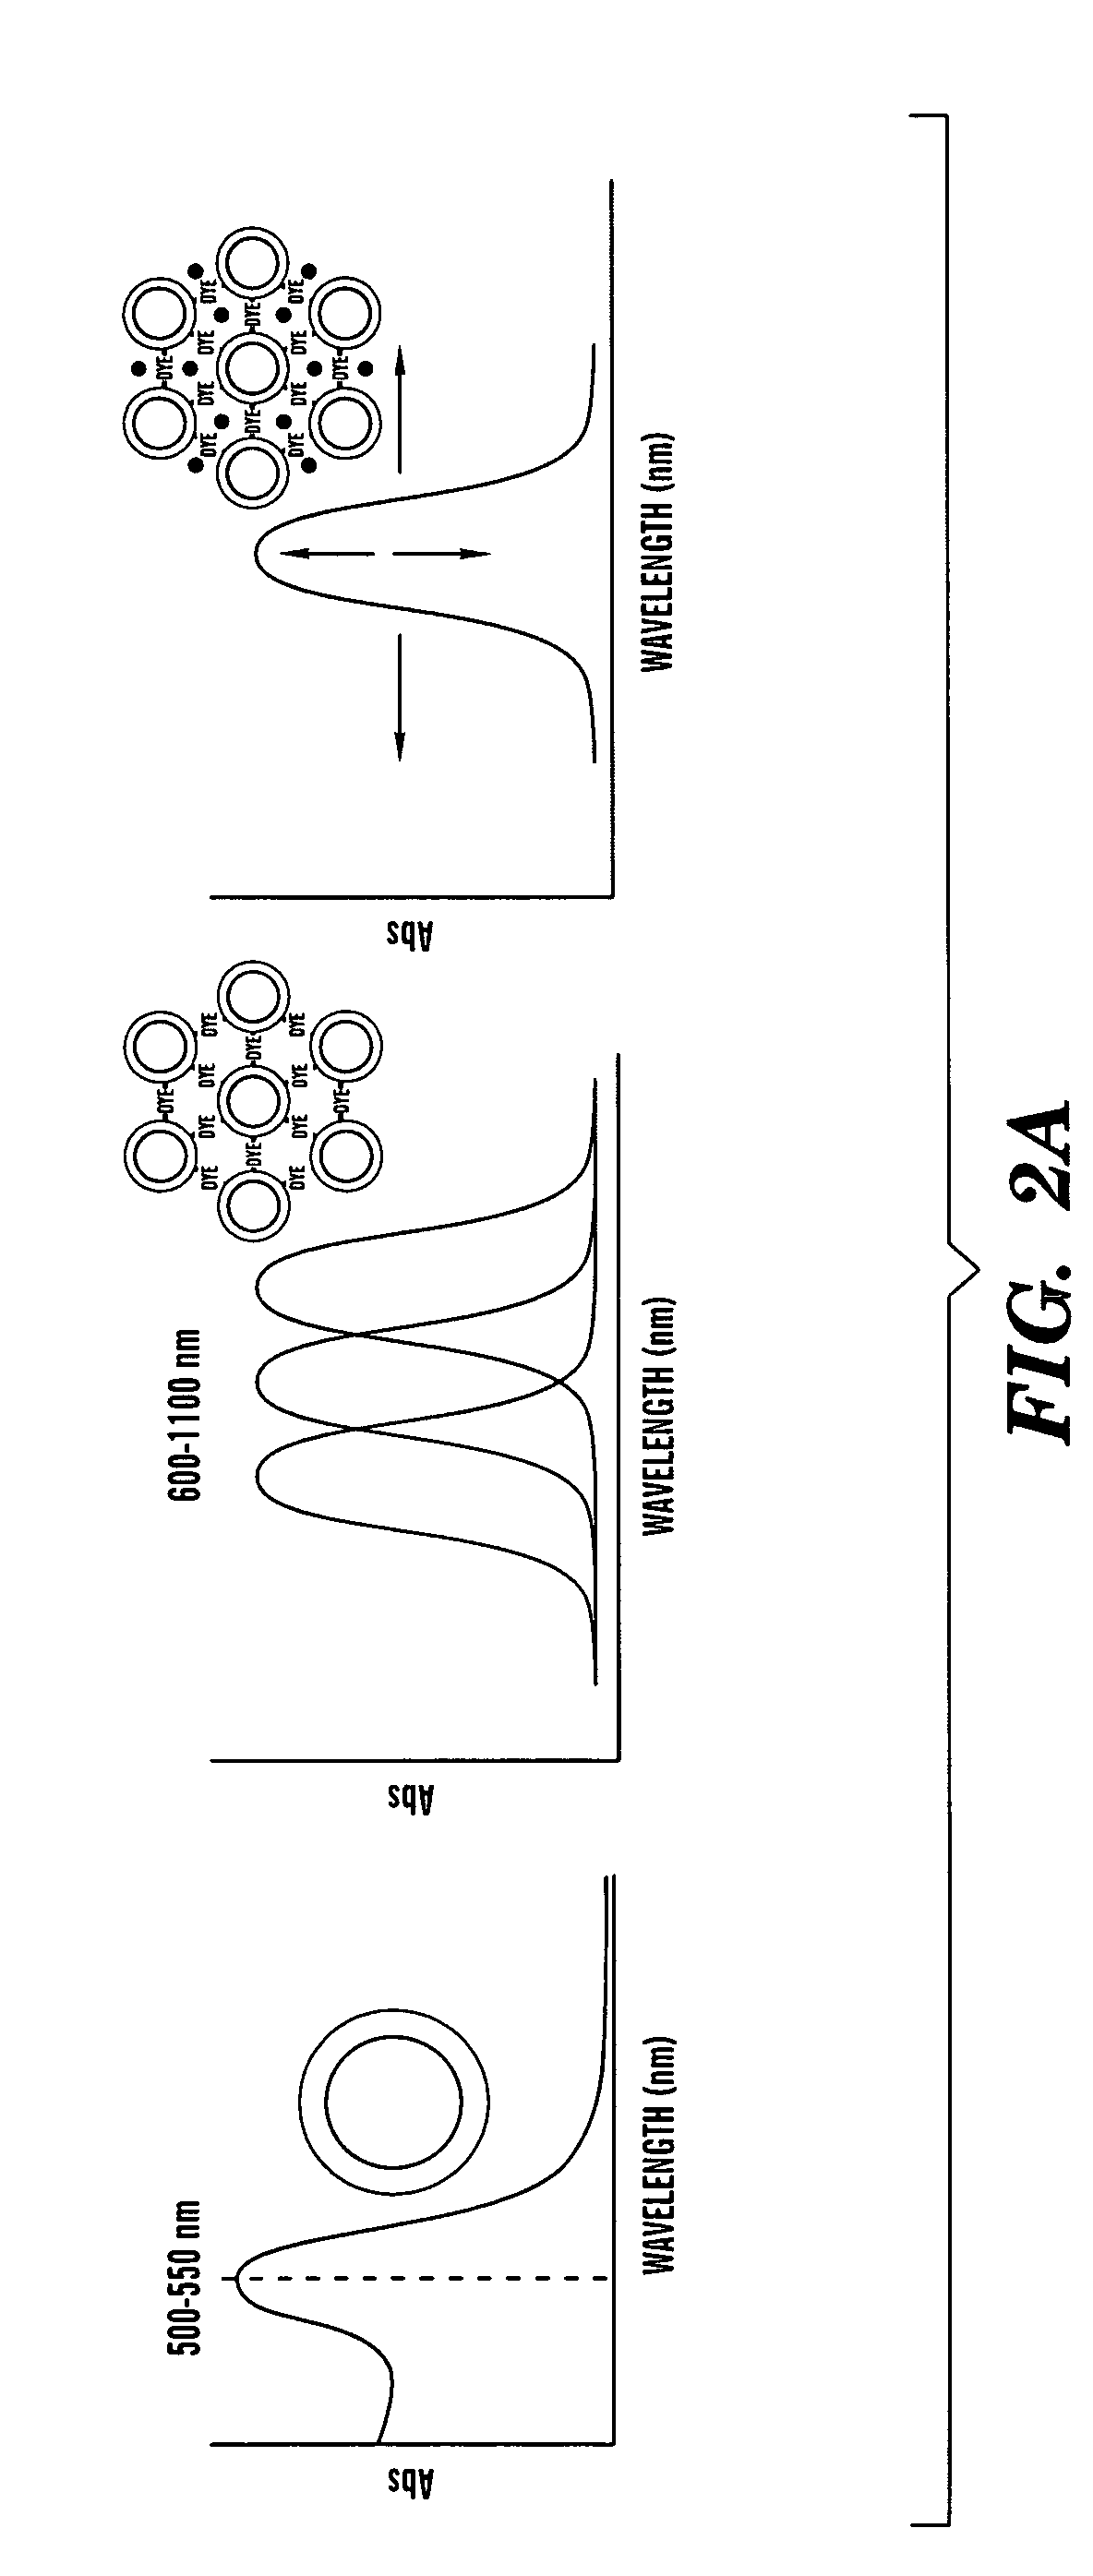 Aggregates of plural transition metal nanoparticles and plural cyanine dye molecules